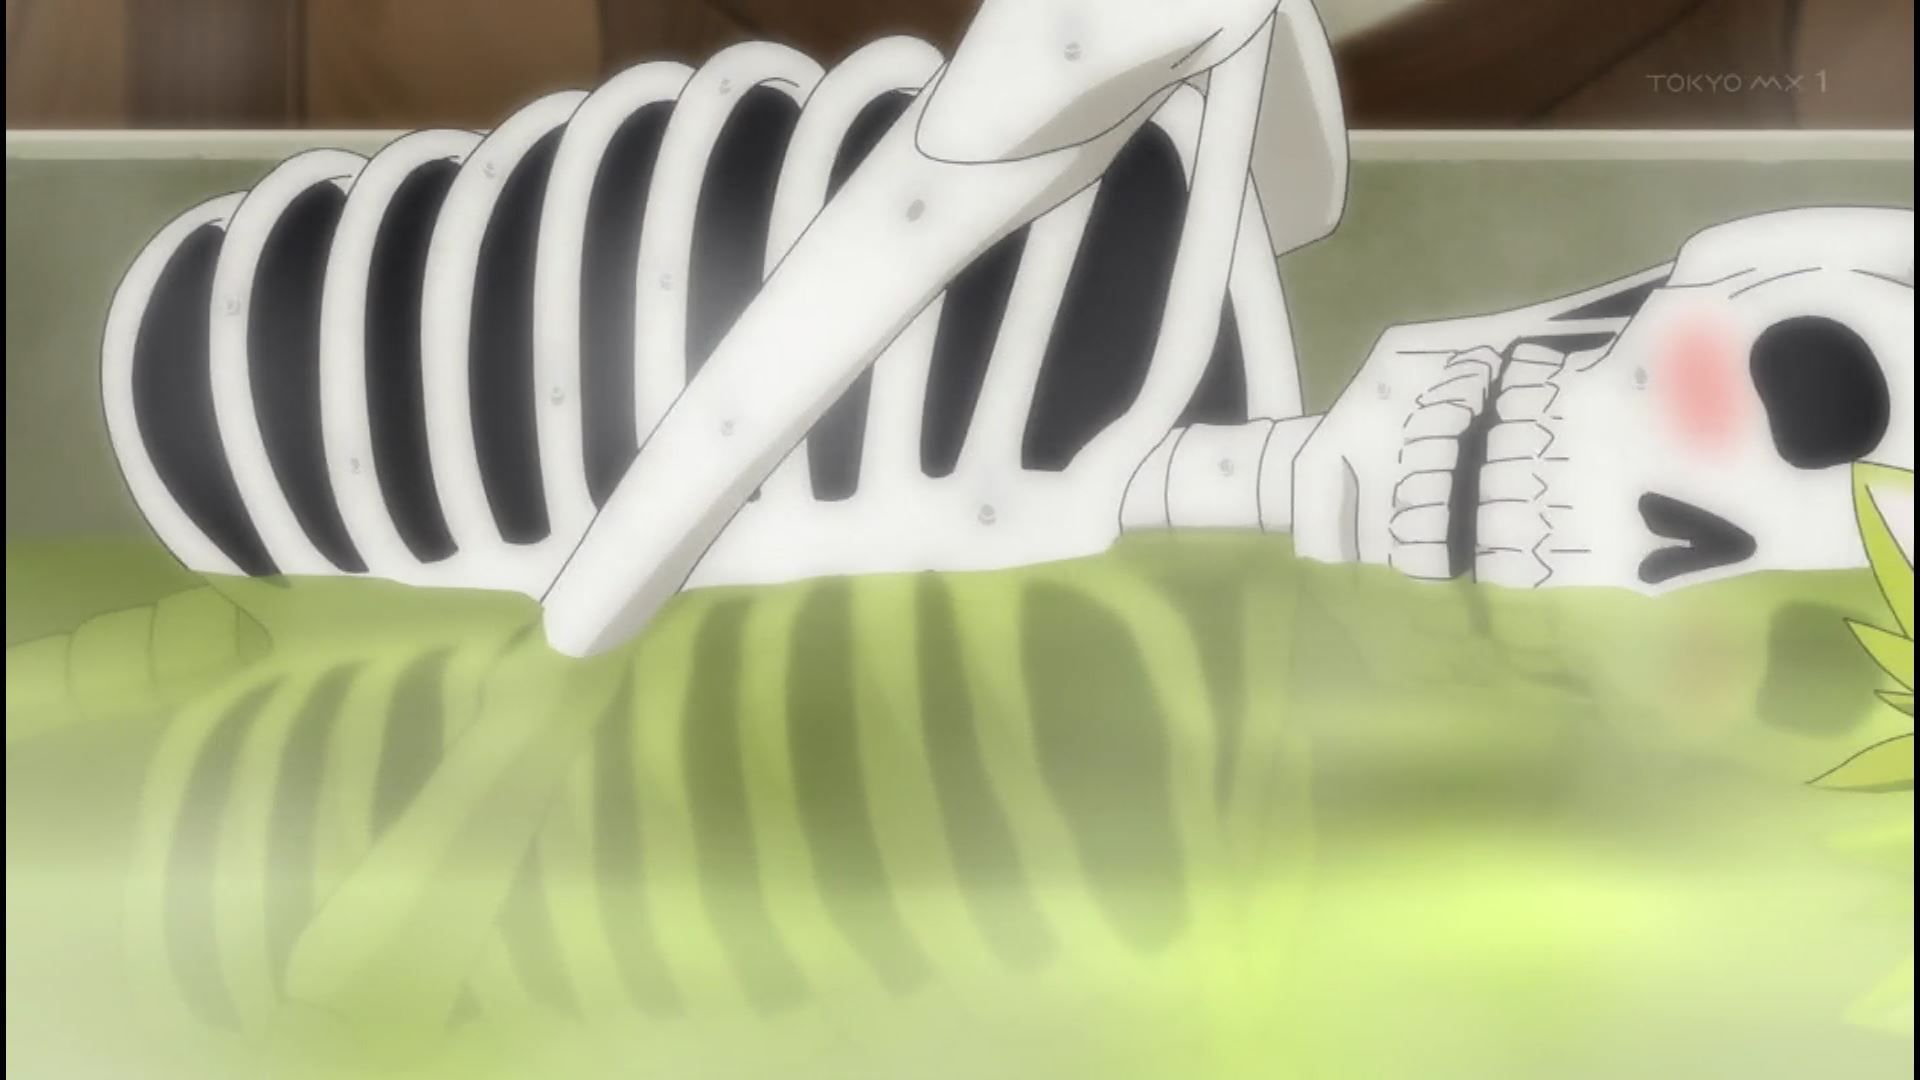 In episode 6 of the anime "Skeleton Knight, I'm Going Out to Another World" a girl takes off her clothes and looks completely naked and erotic 12